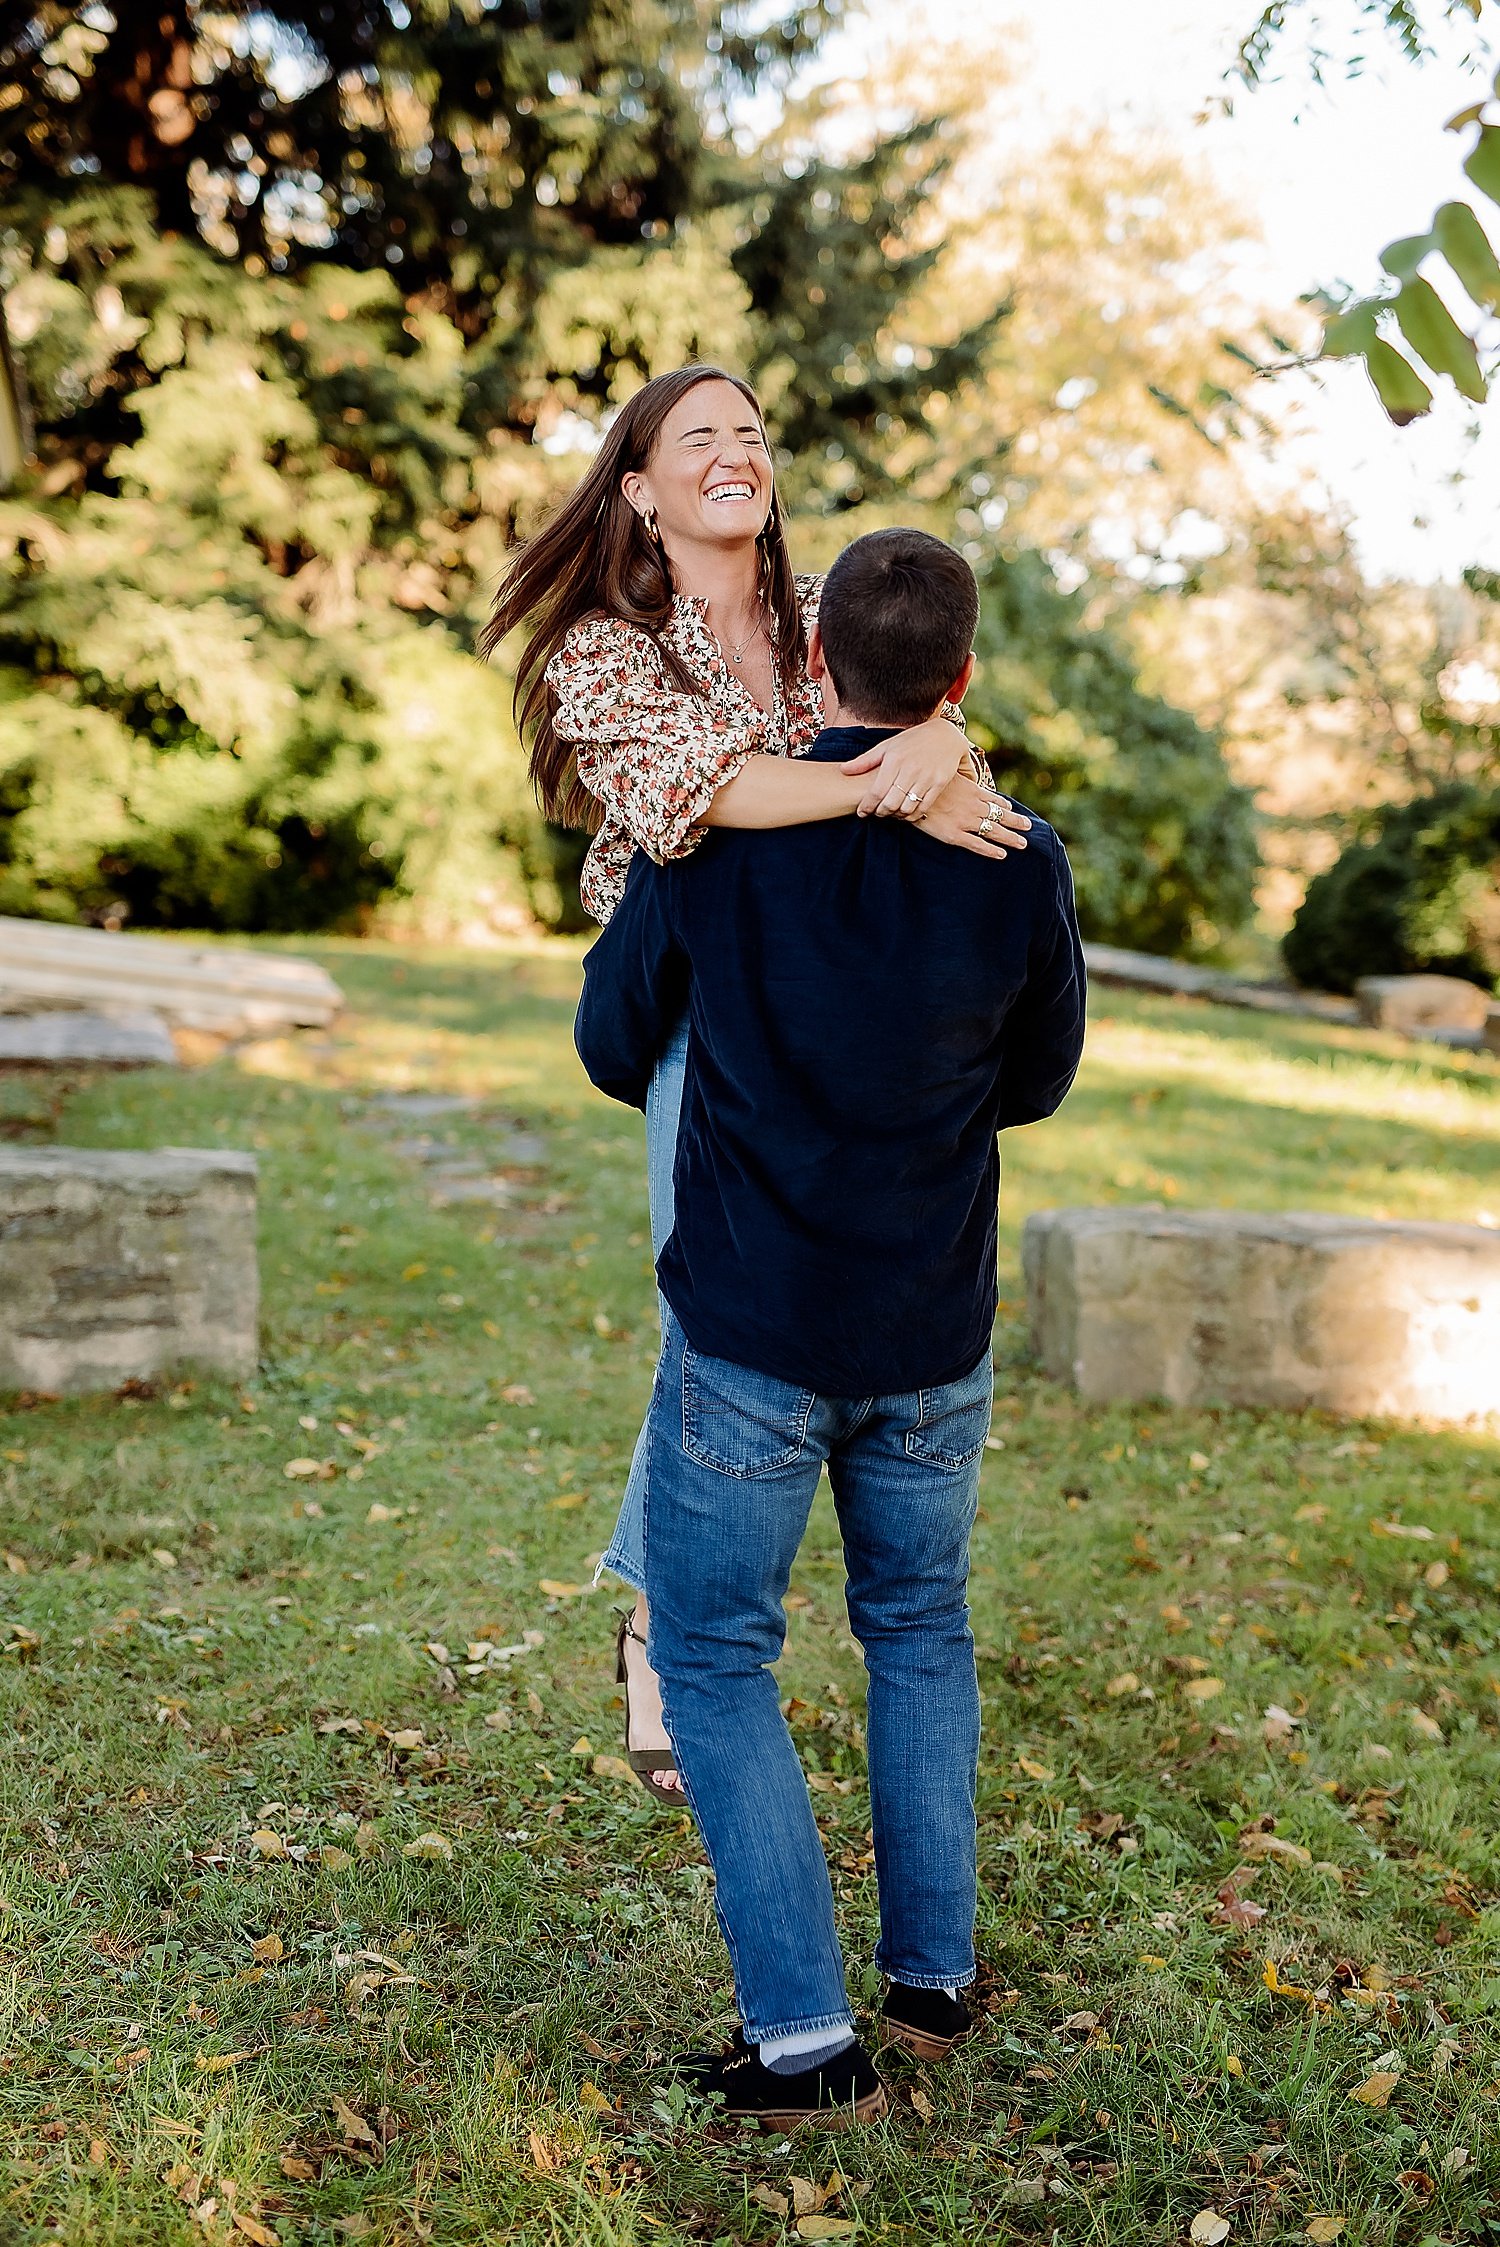 Valley_Forge_Fall_Engagement_Photos_0011.jpg